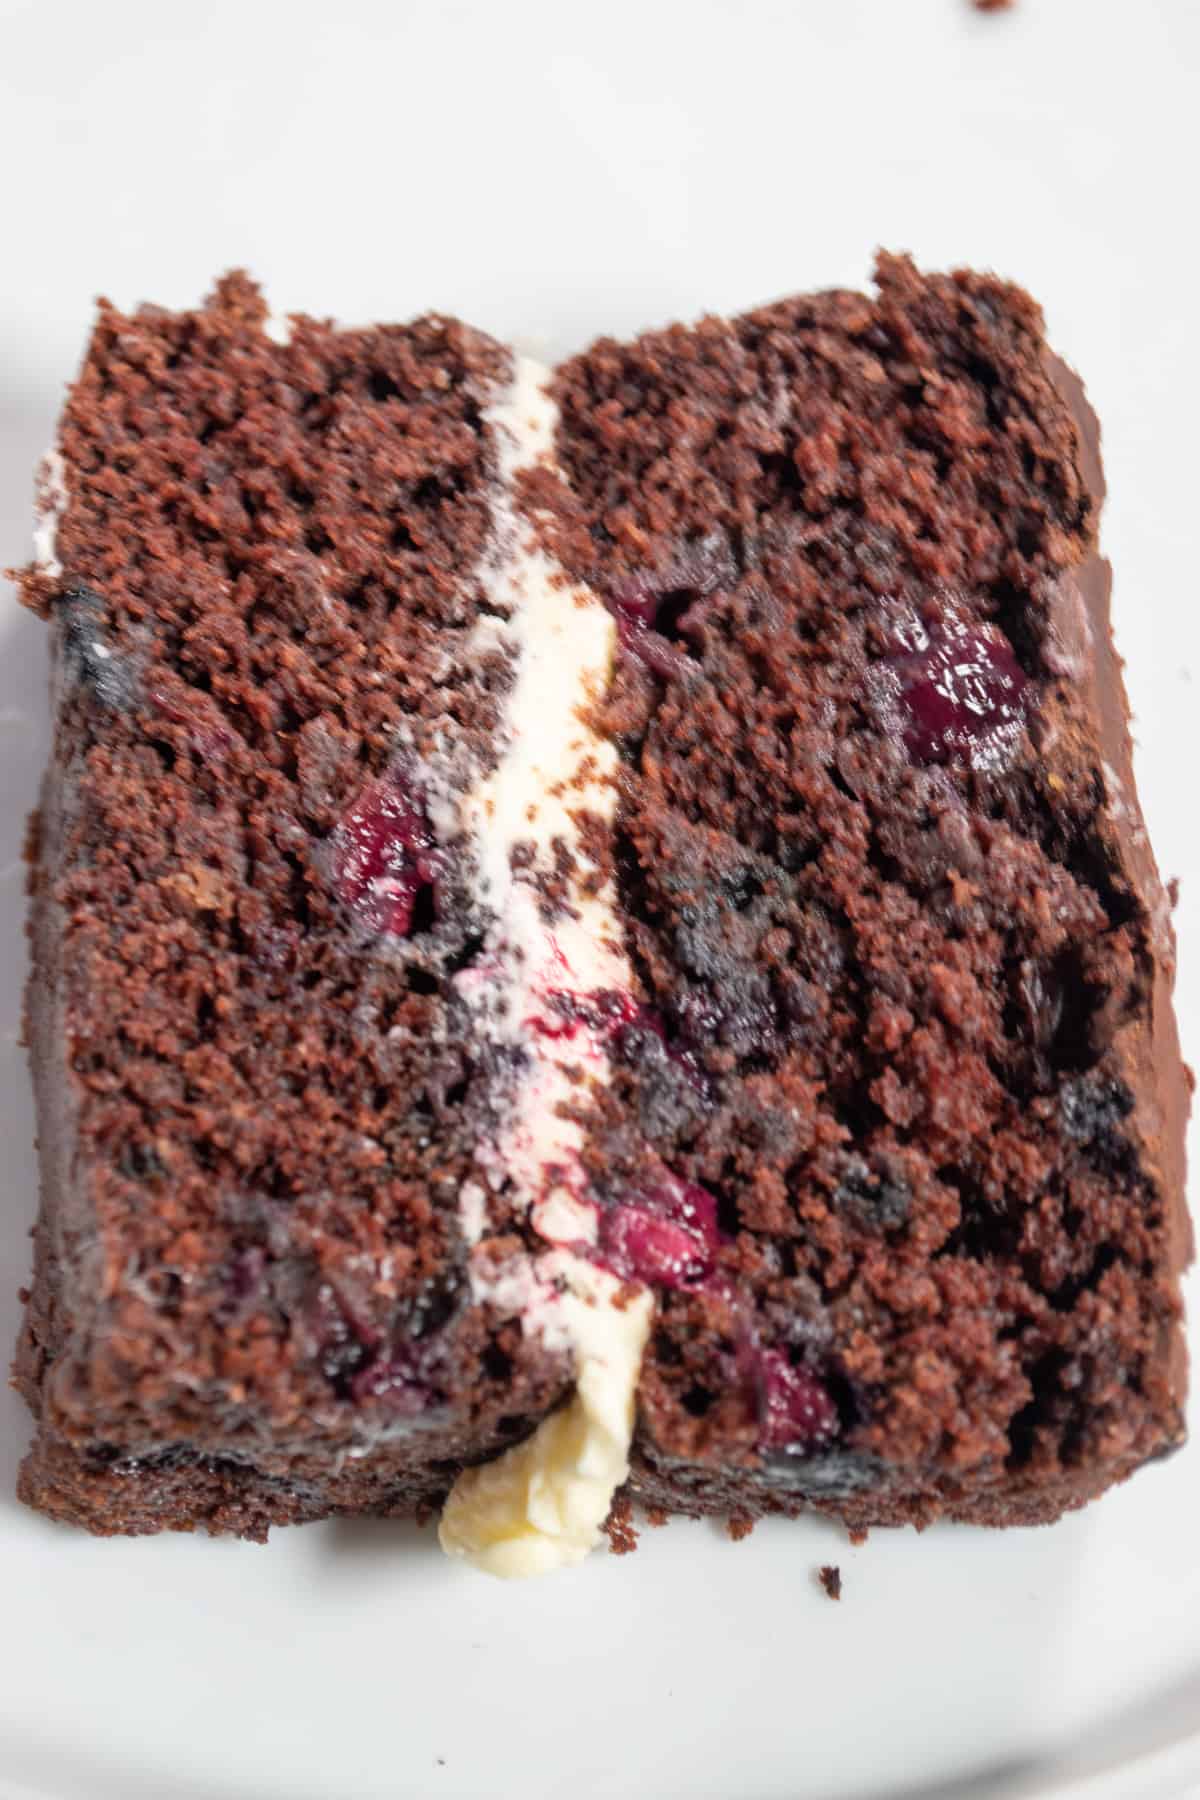 A shot of a chunky slice of my chocolate eggless blueberry cake. Buttercream down the centre.